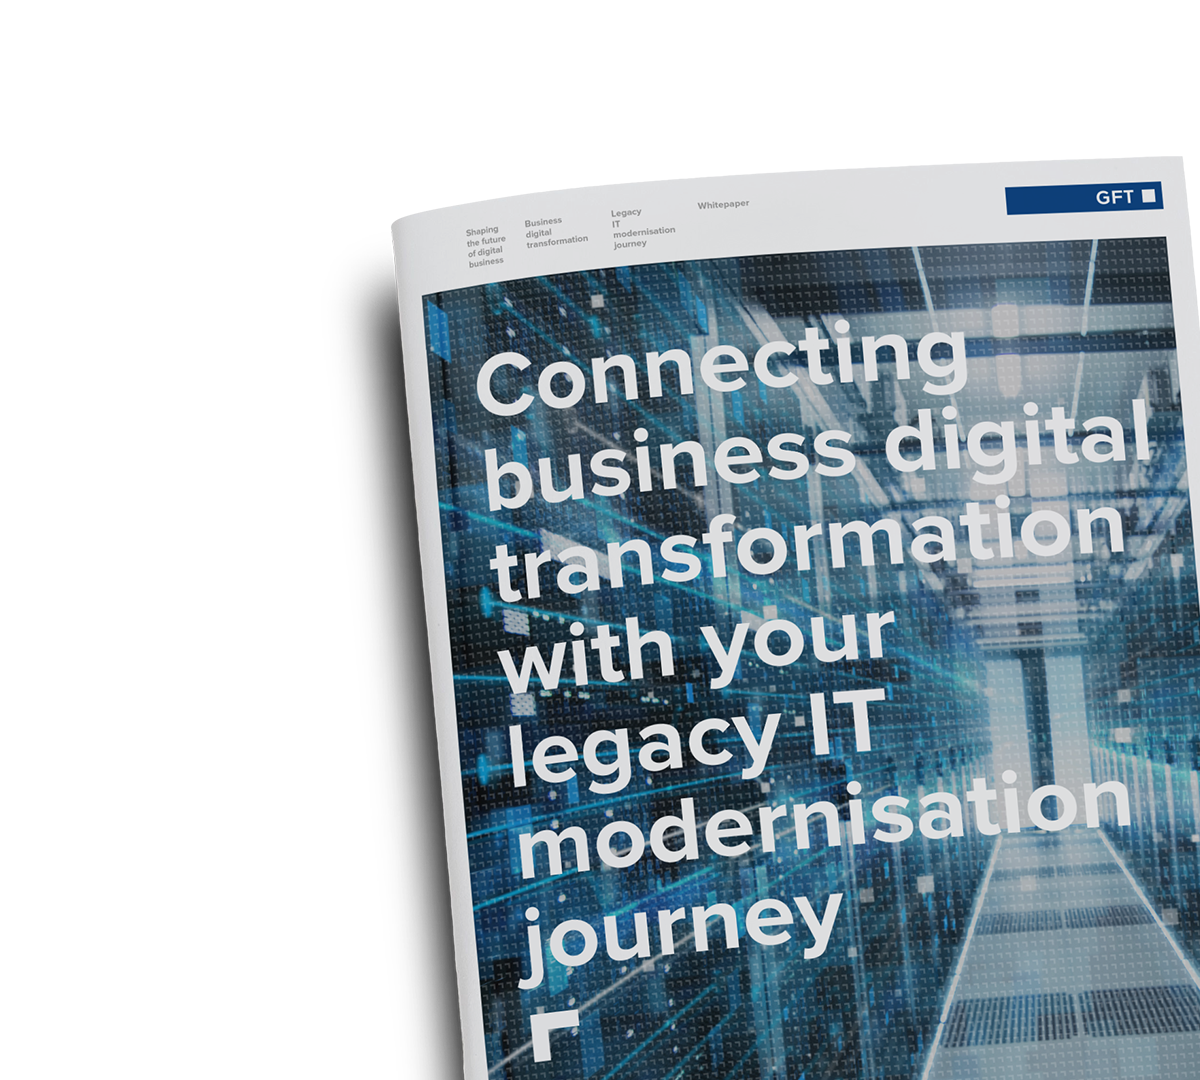 Learn how mainframe “offloading” plus digital transformation helps you to modernise without rip-and-replace.